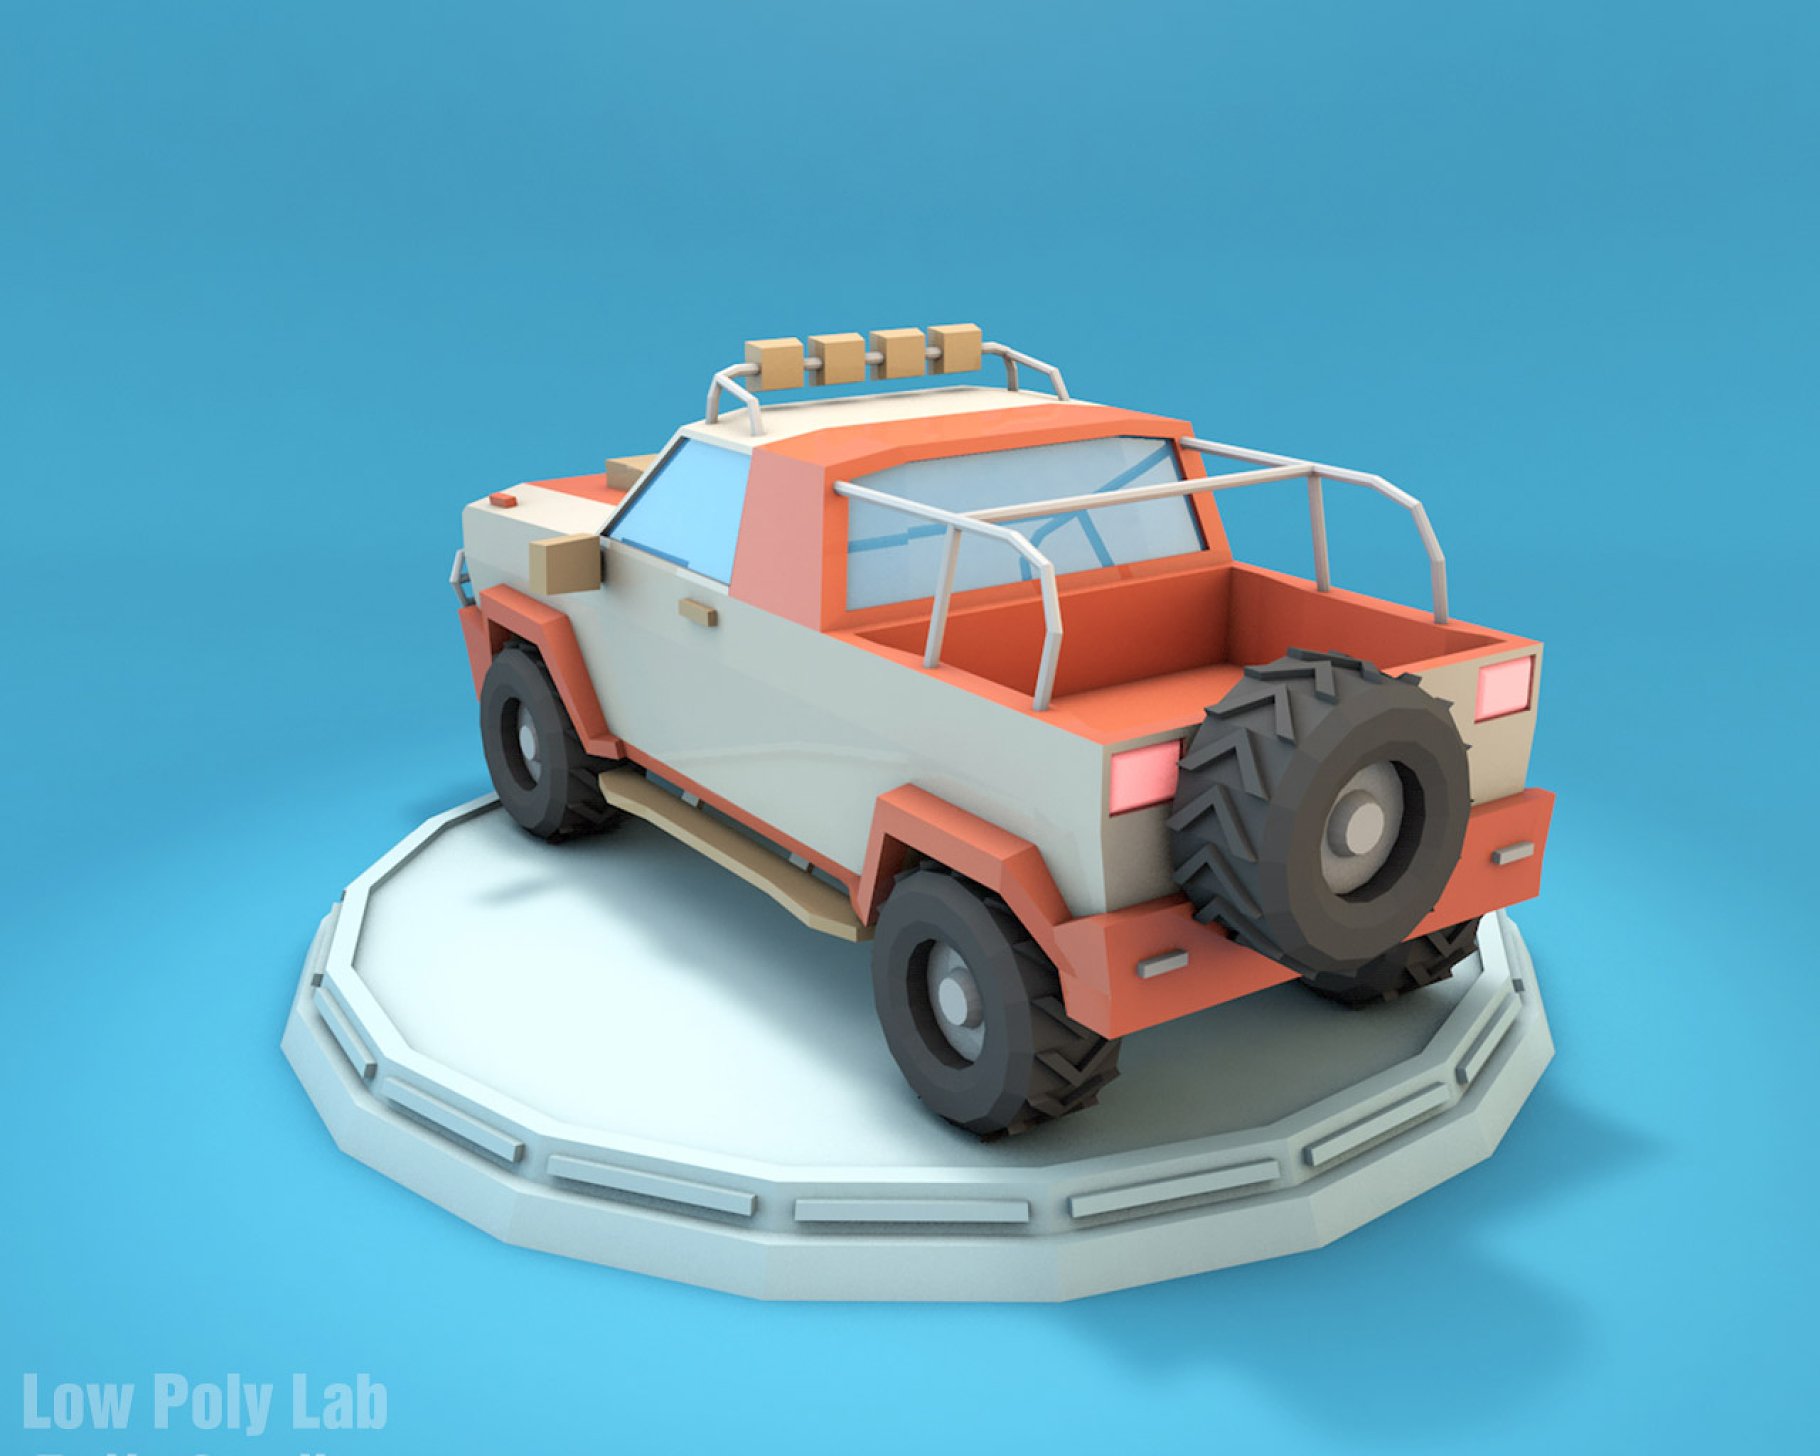 Back color mockup of low poly jeep on a blue background.